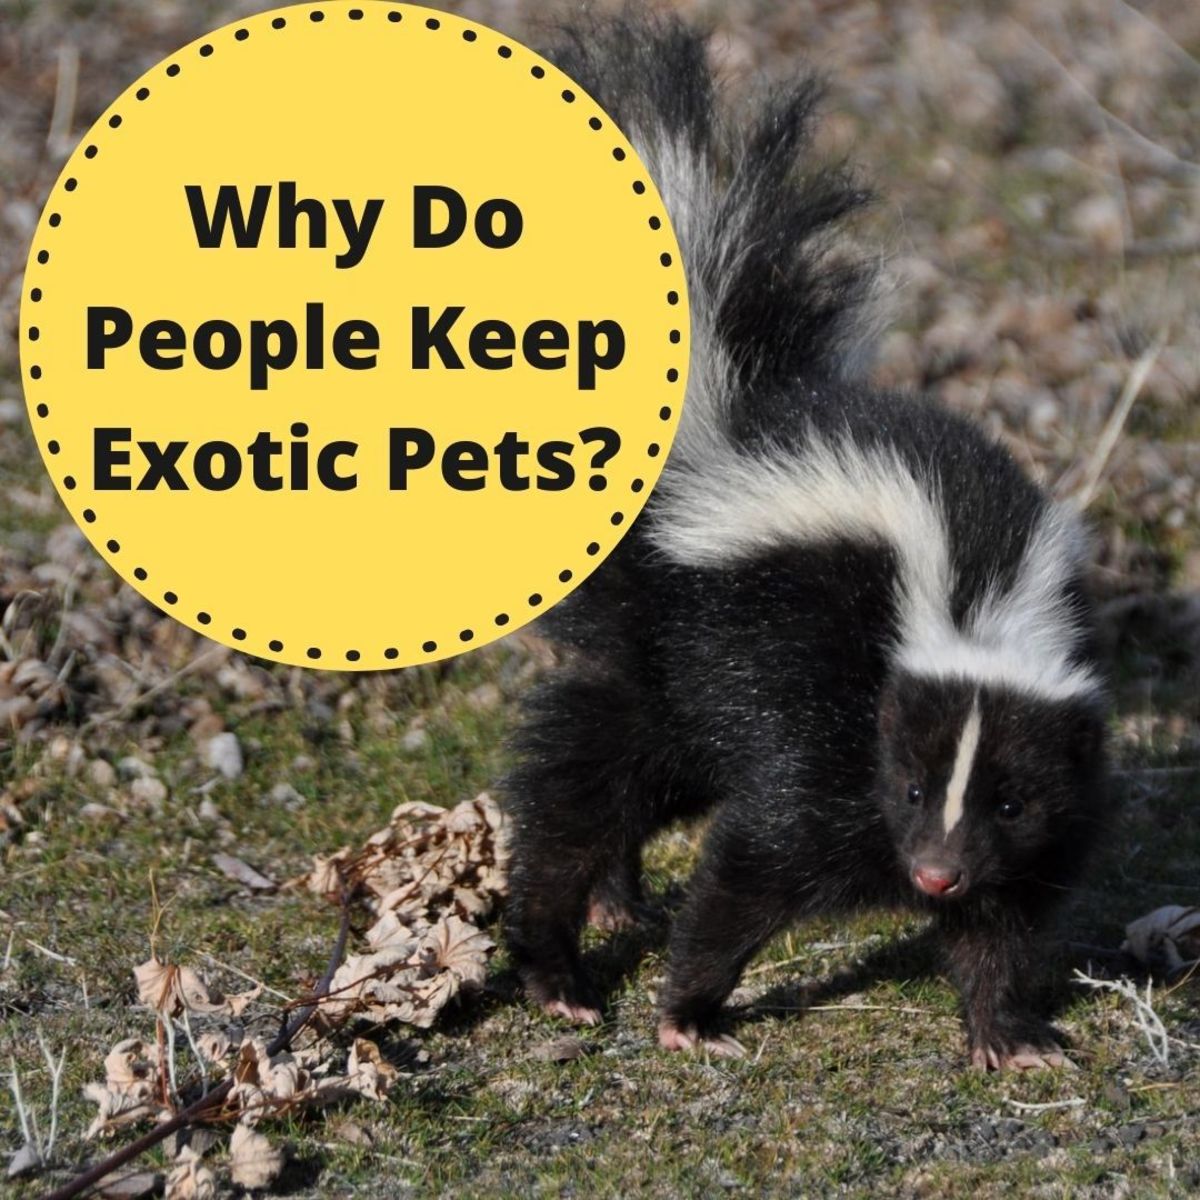 Why Do People Keep Exotic Pets?